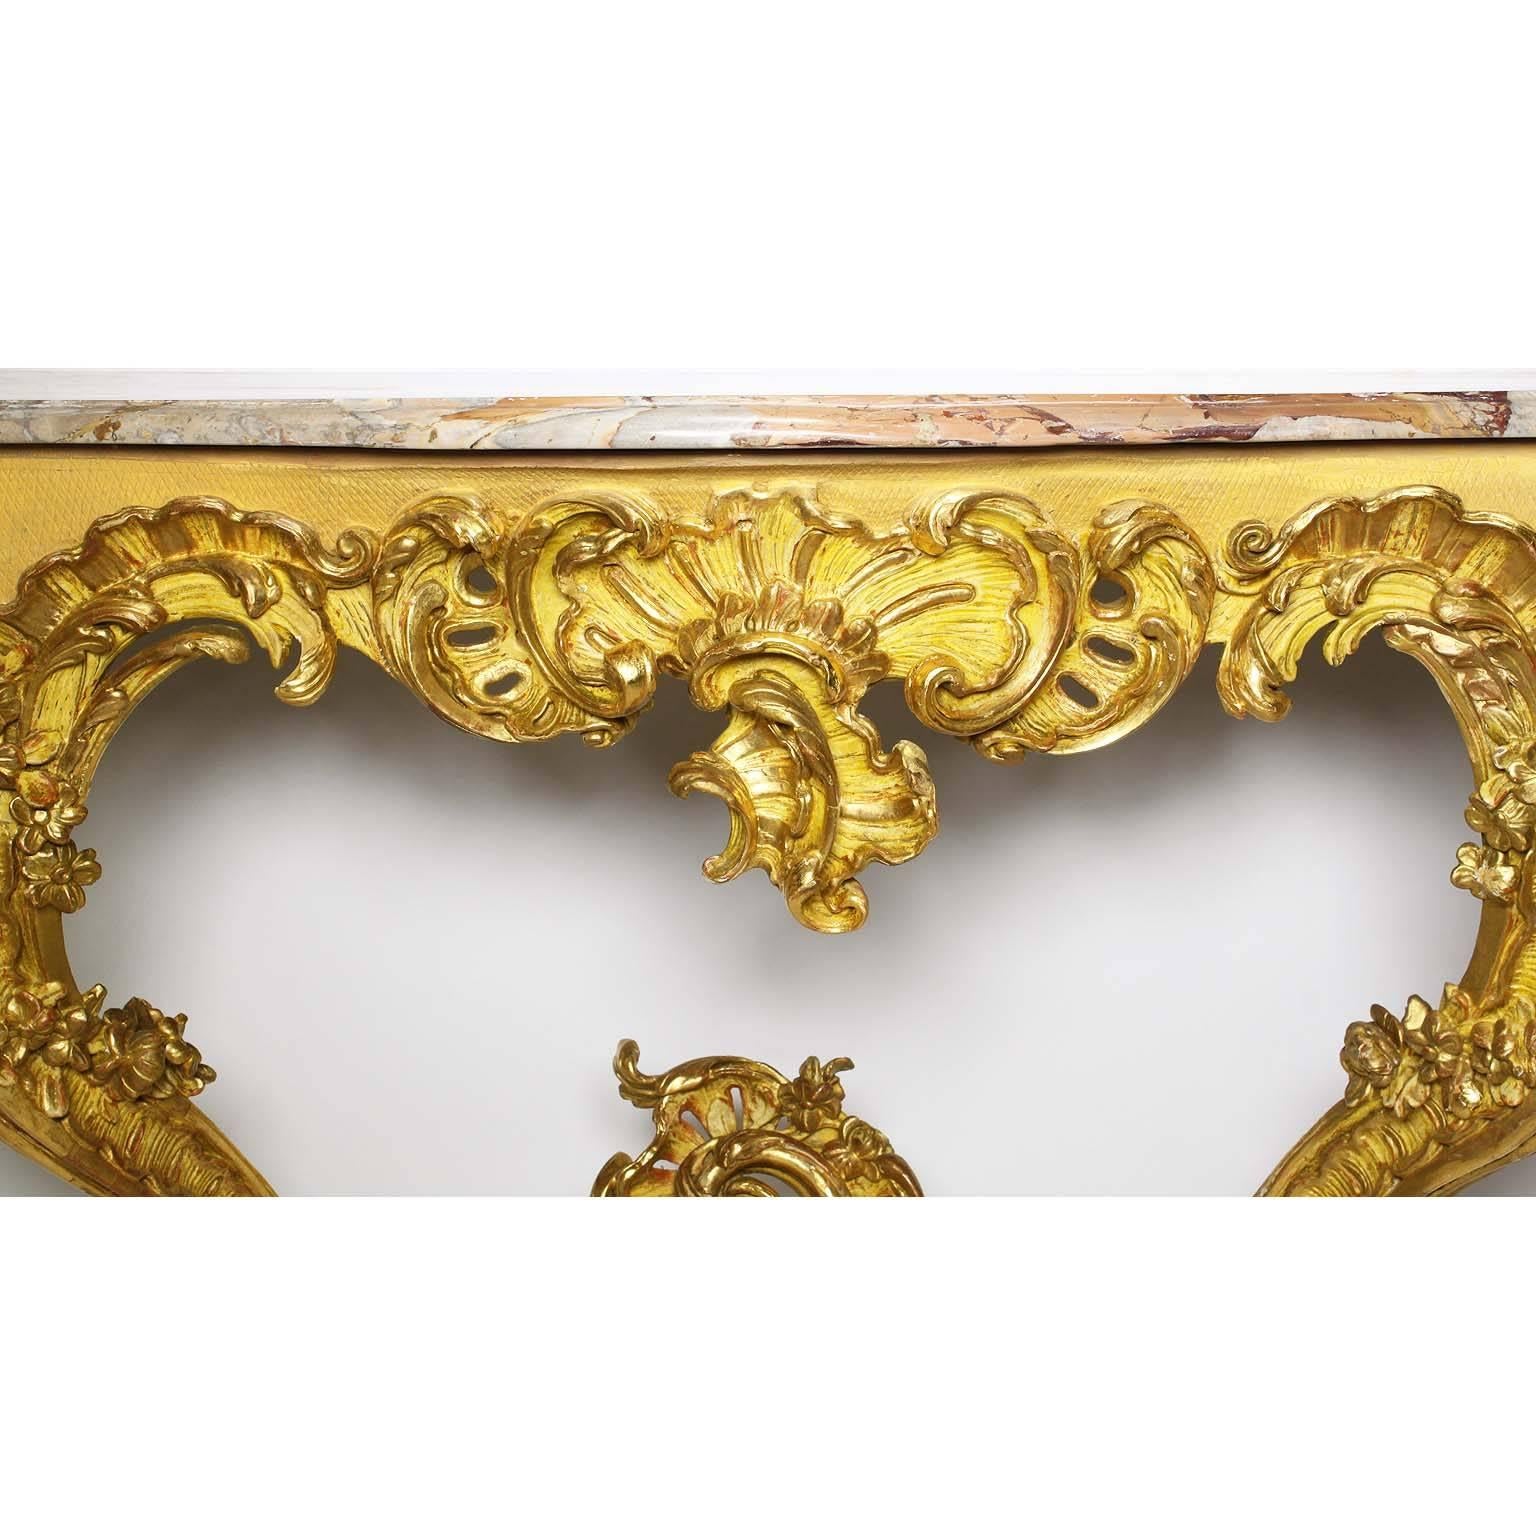 A very fine French 19th century Louis XV style Rococo giltwood carved console table with marble top. The ornately carved serpentine frame with a shell and scrolled apron with a gilt and yellow primer background, raised on dual front 